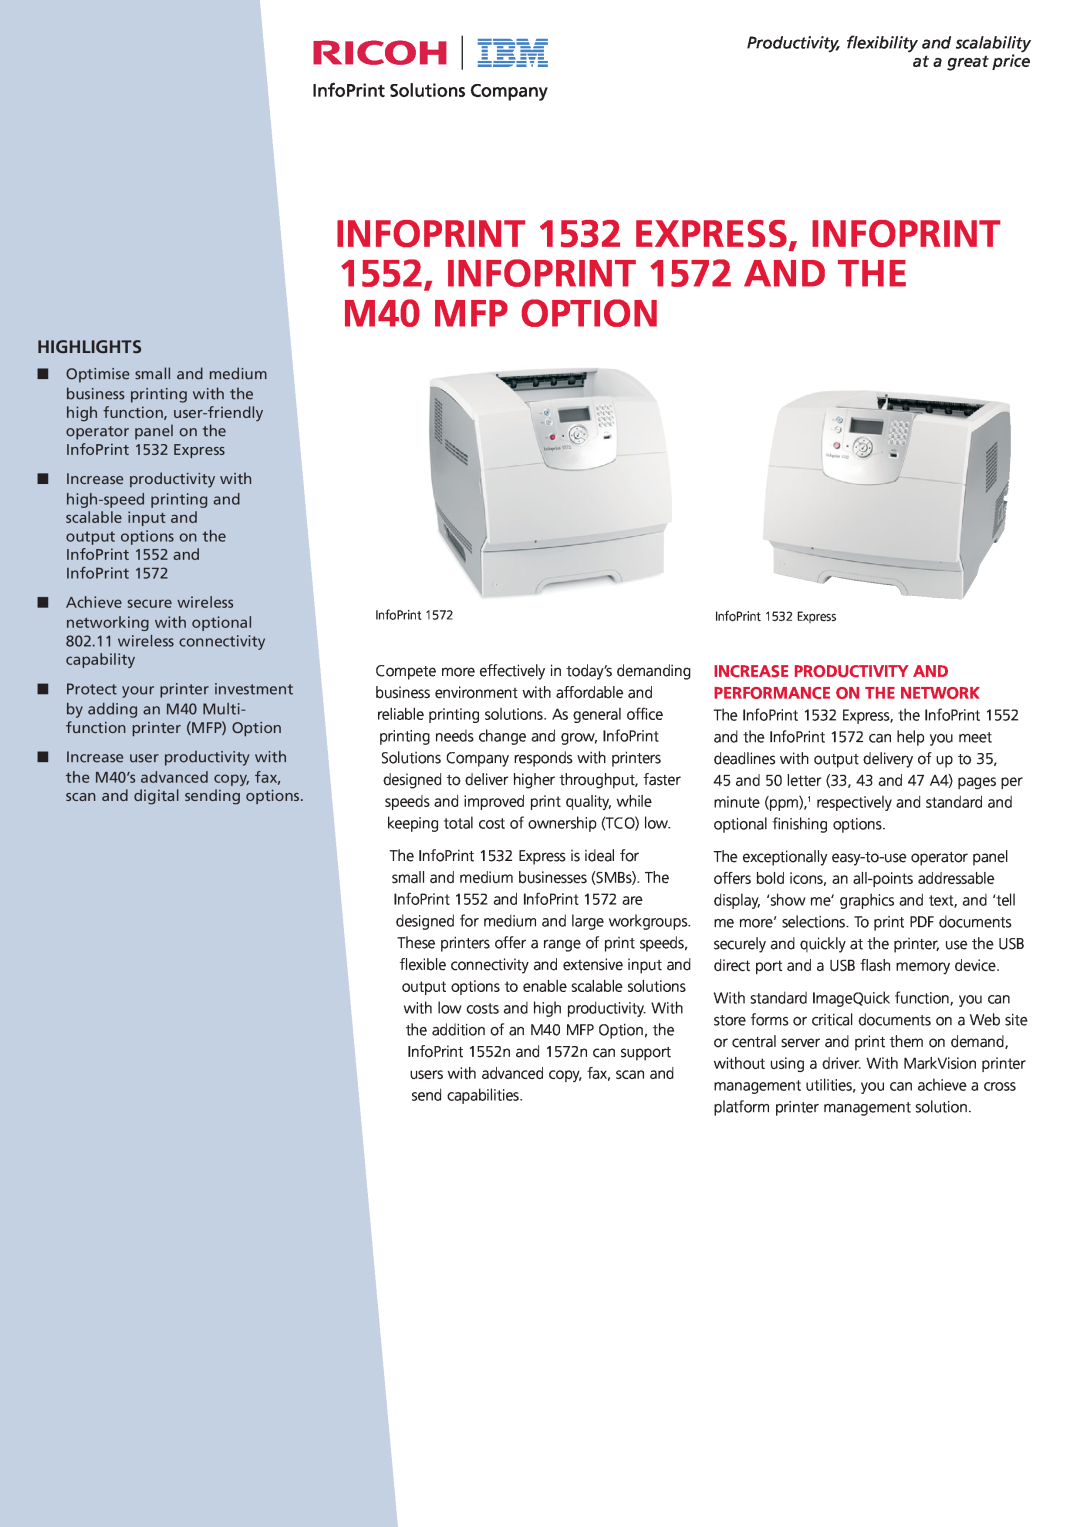 IBM 1552, M40 manual Increase Productivity And Performance On The Network, Highlights 